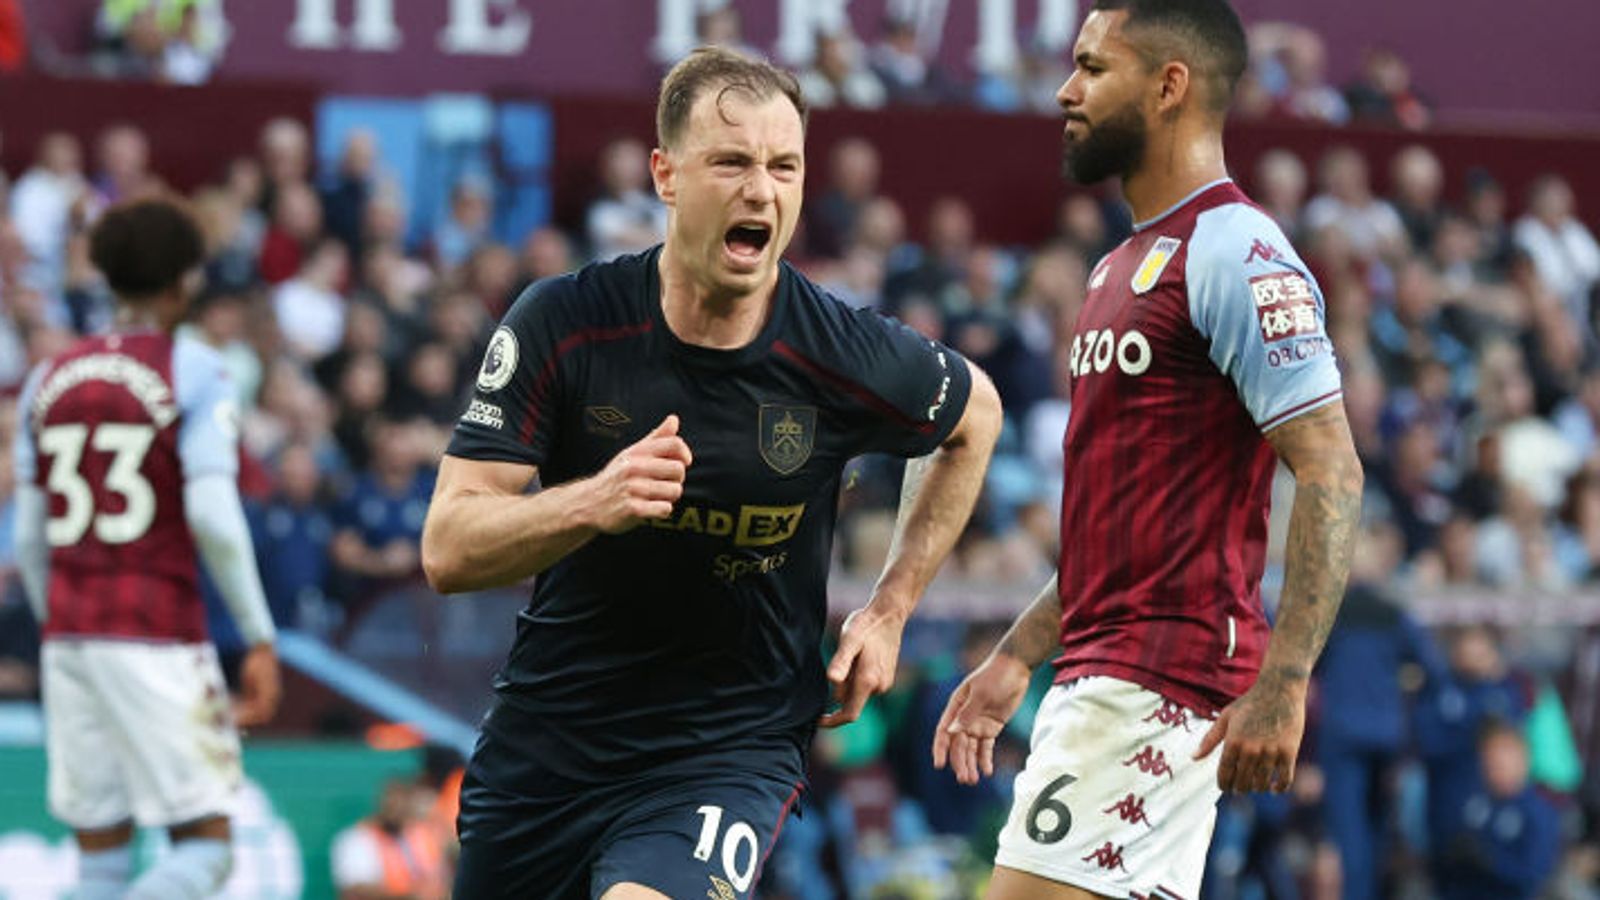 Barnes: Refs want Burnley relegated as we play 'ugly'